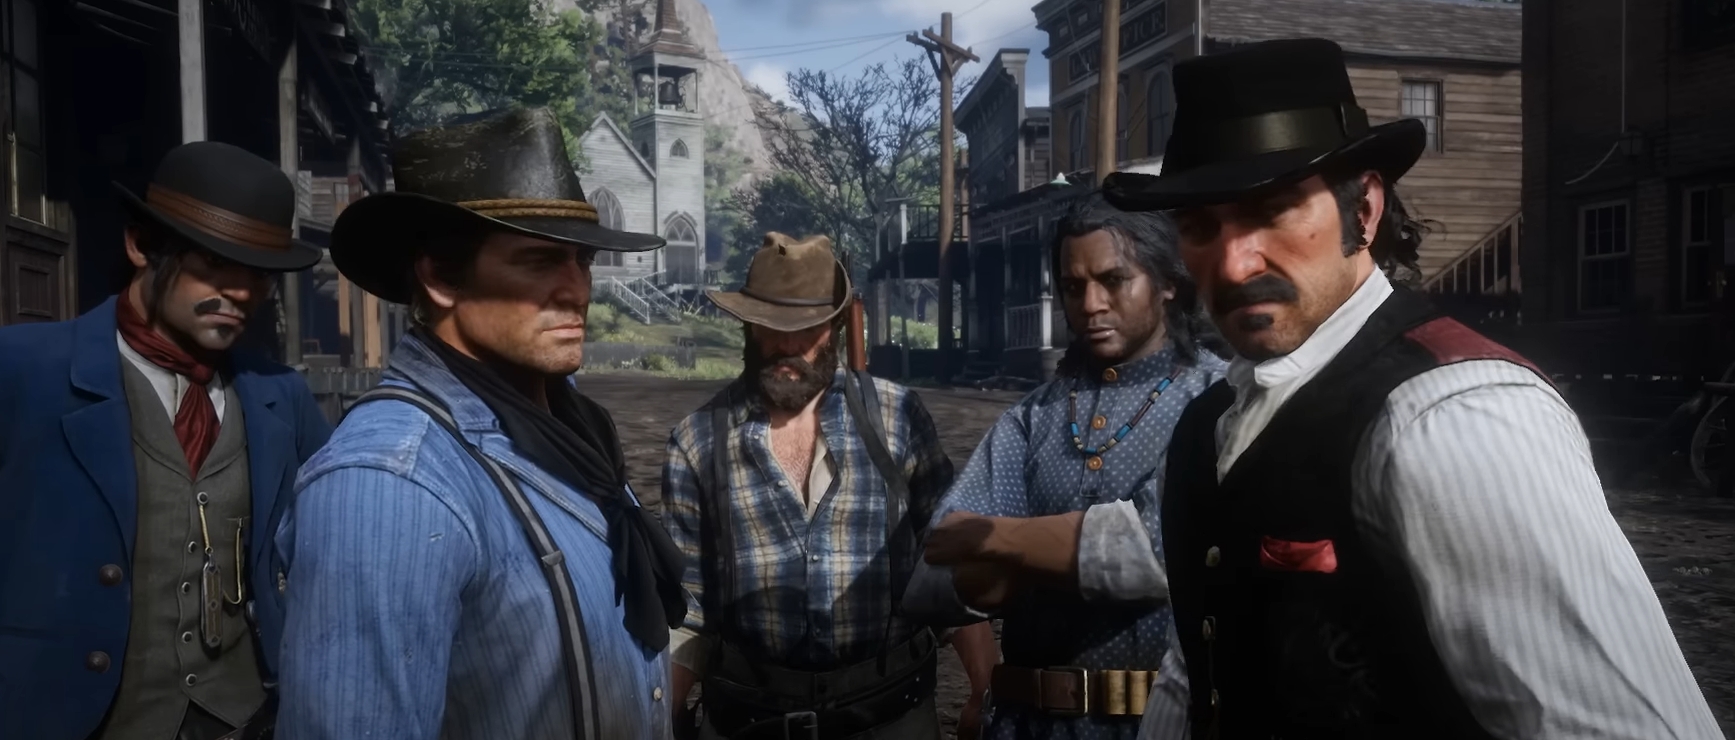 As GTA 6 looms, Red Dead Redemption 2 reaches new Steam high